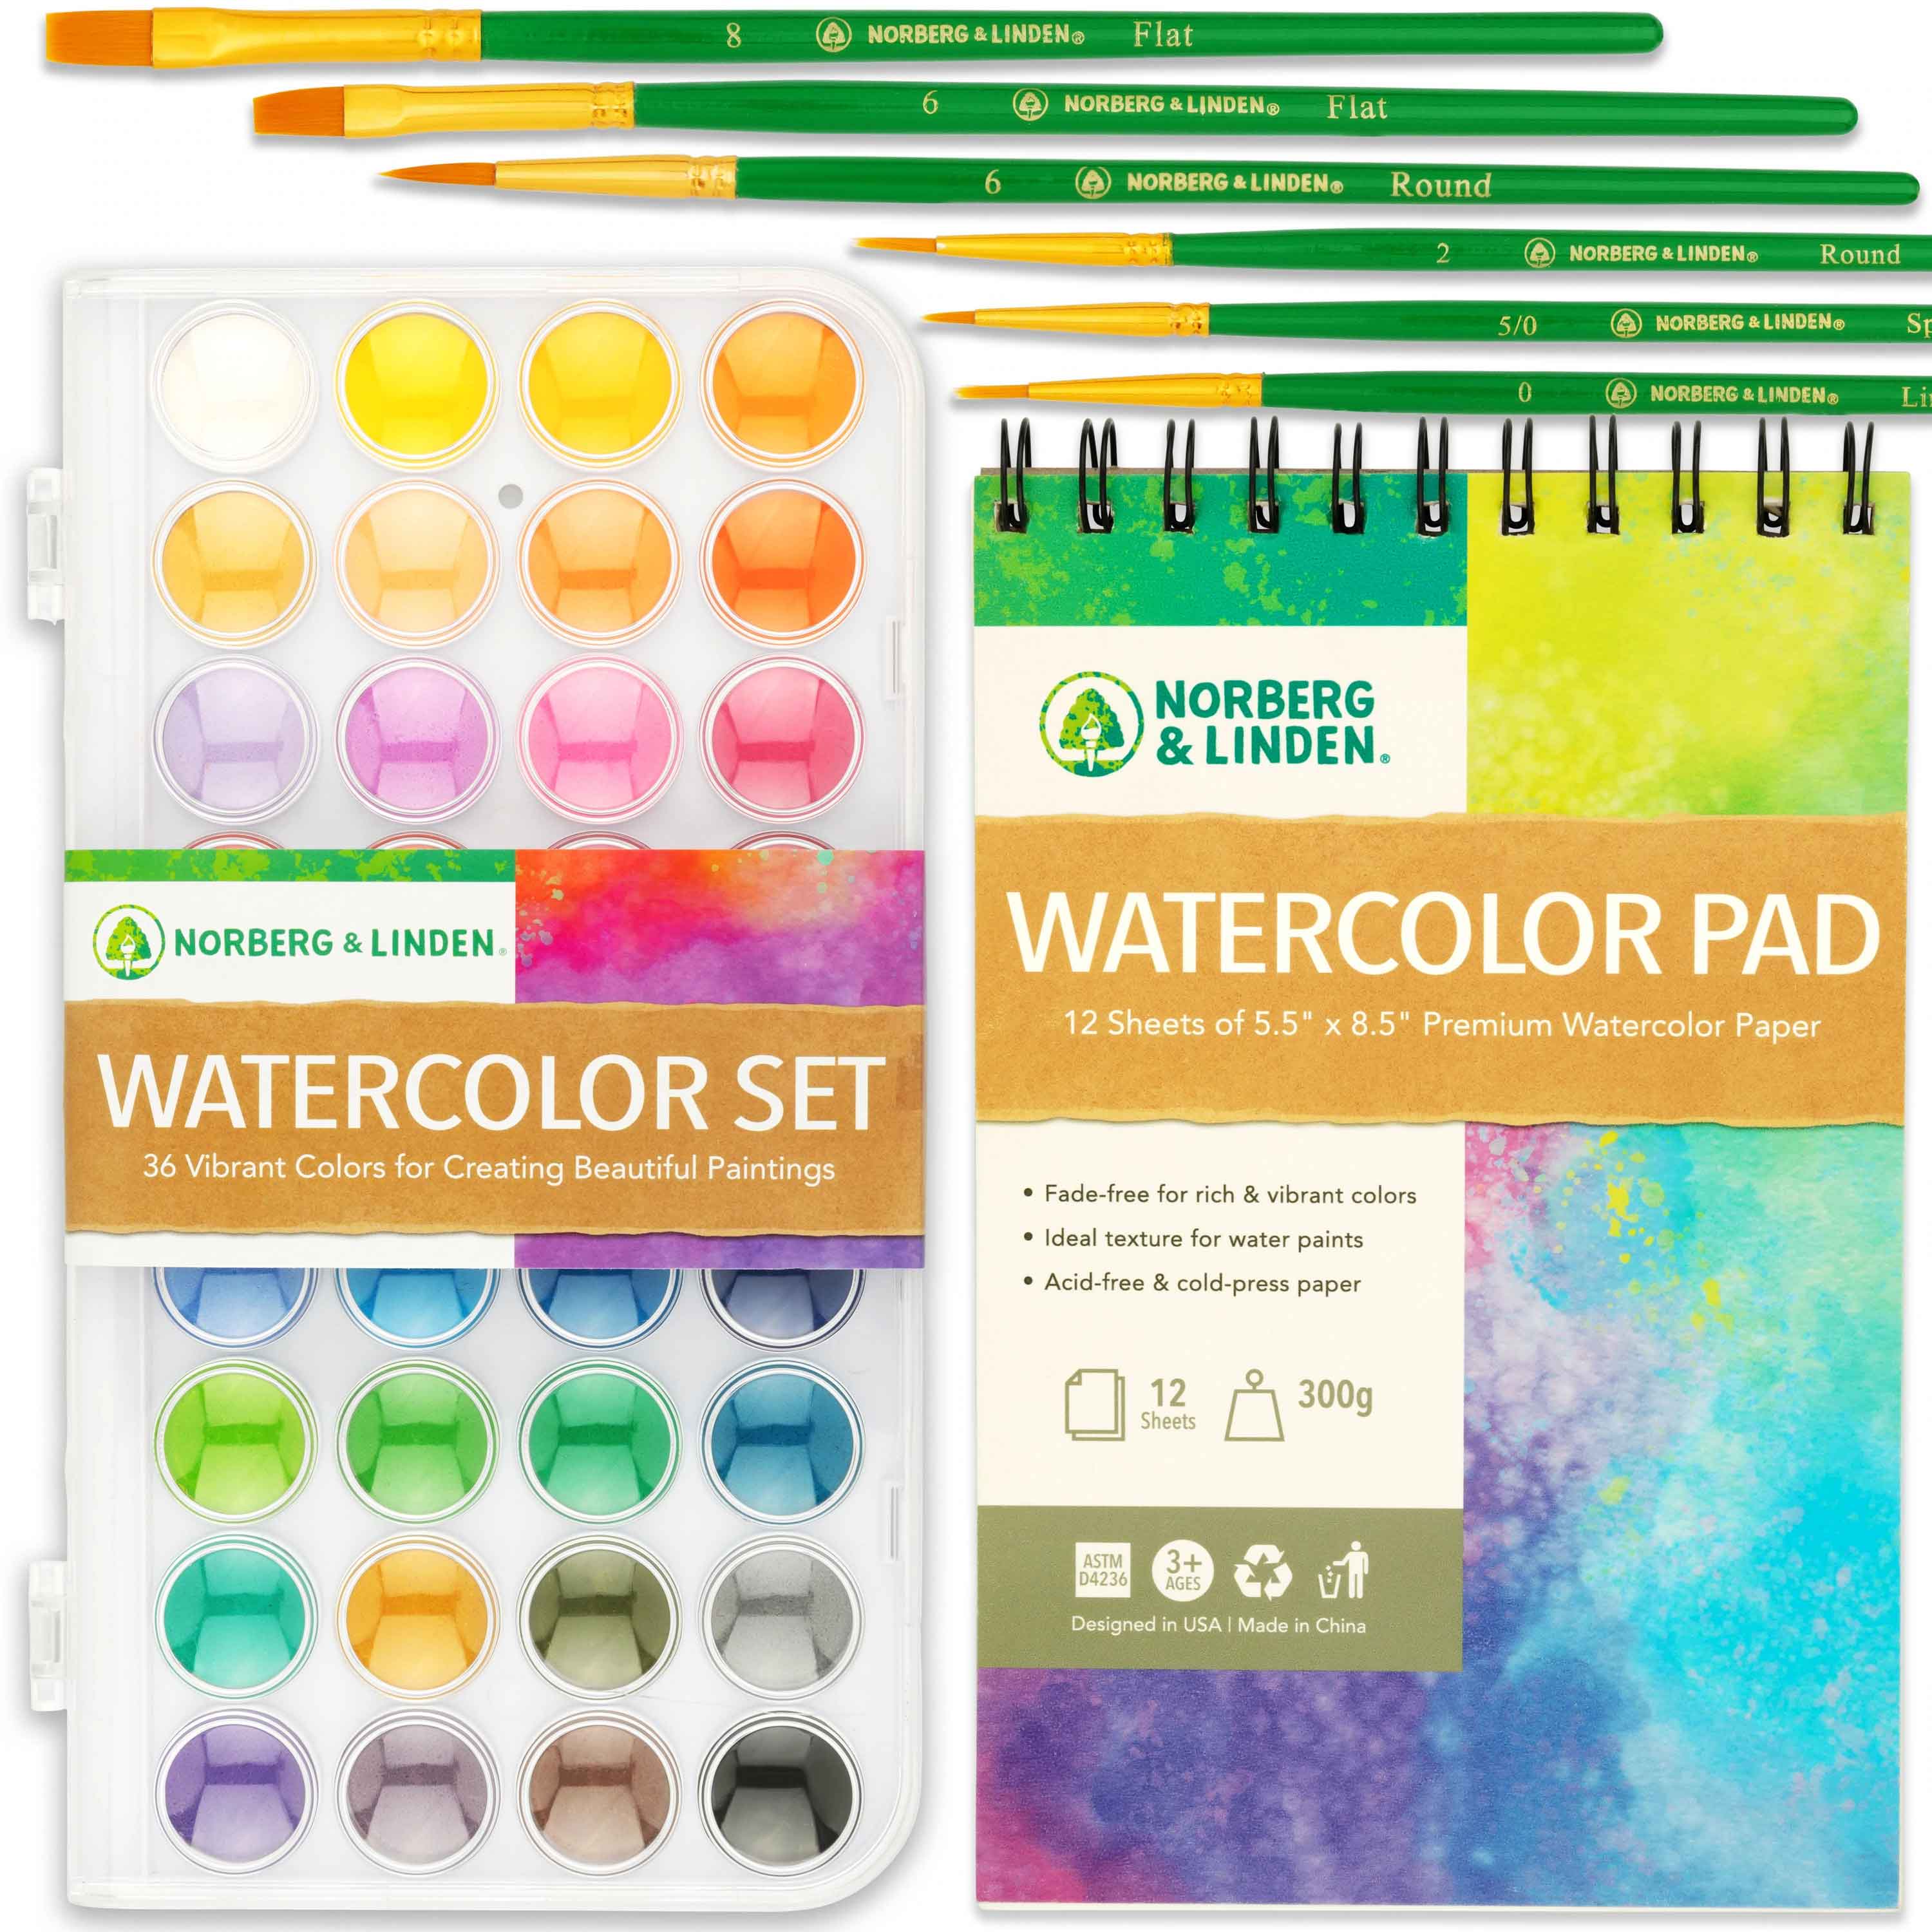 Watercolor Paint Set - 36 Premium Paints - 12 Page Pad - 6 Brushes - Painting Supplies with Palette, Watercolors, Art Pad Paper and Artist Brushes